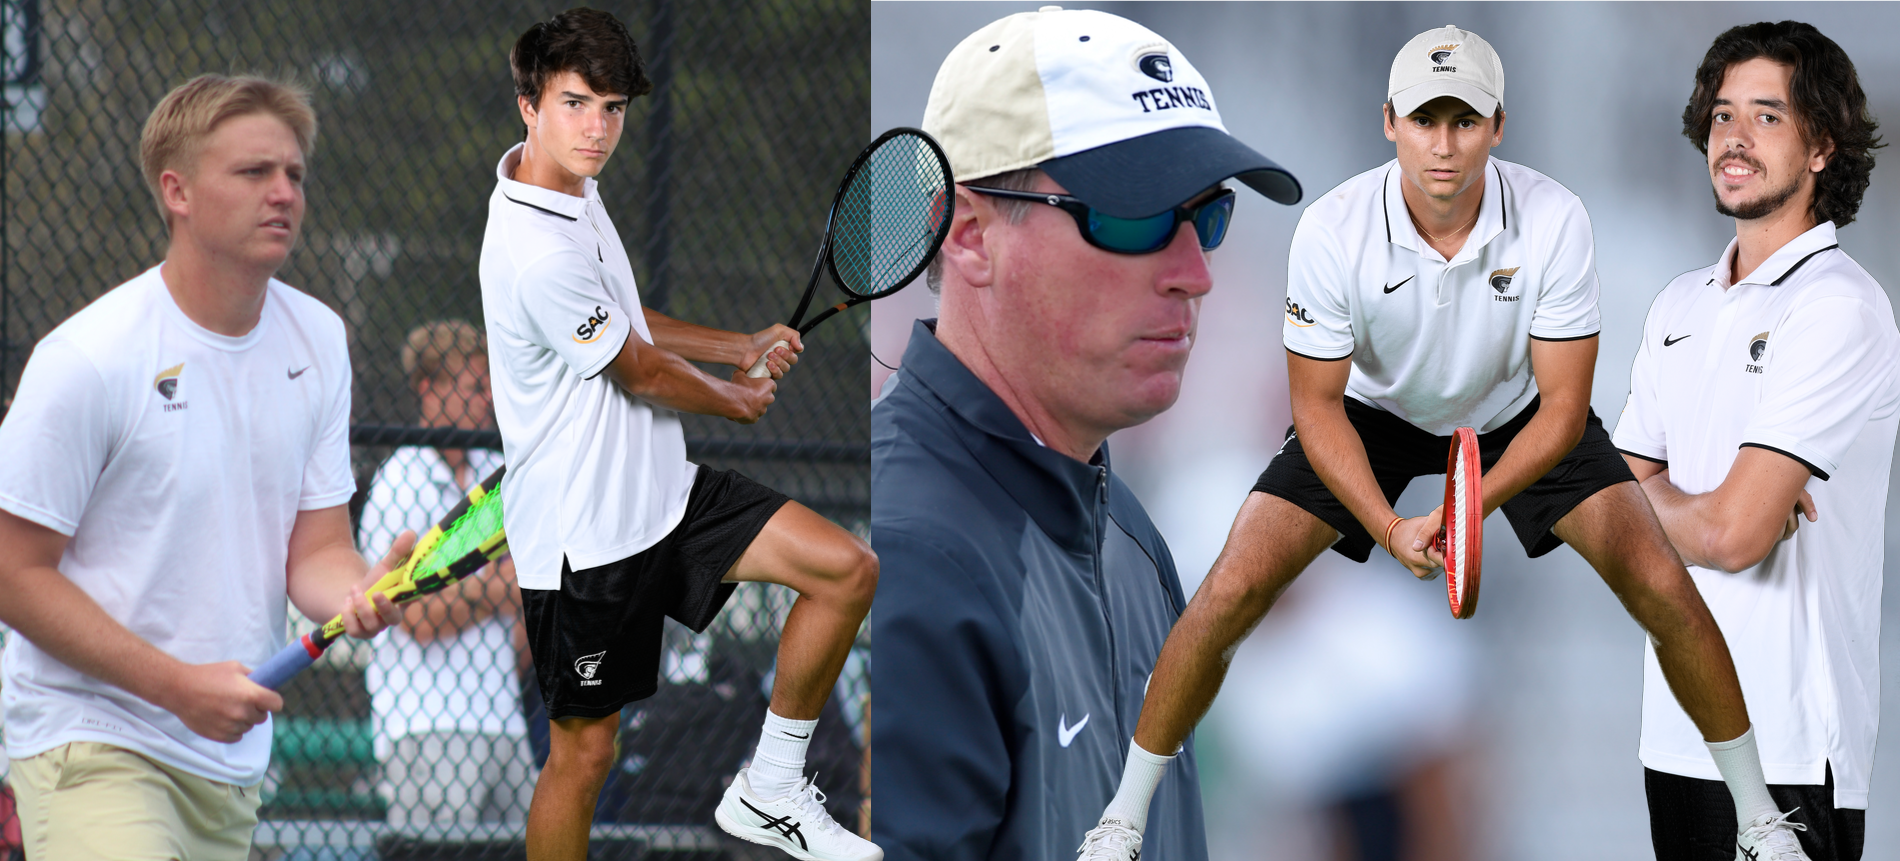 Four Trojans Earn All-Conference Honors; Eskridge Named Coach of the Year